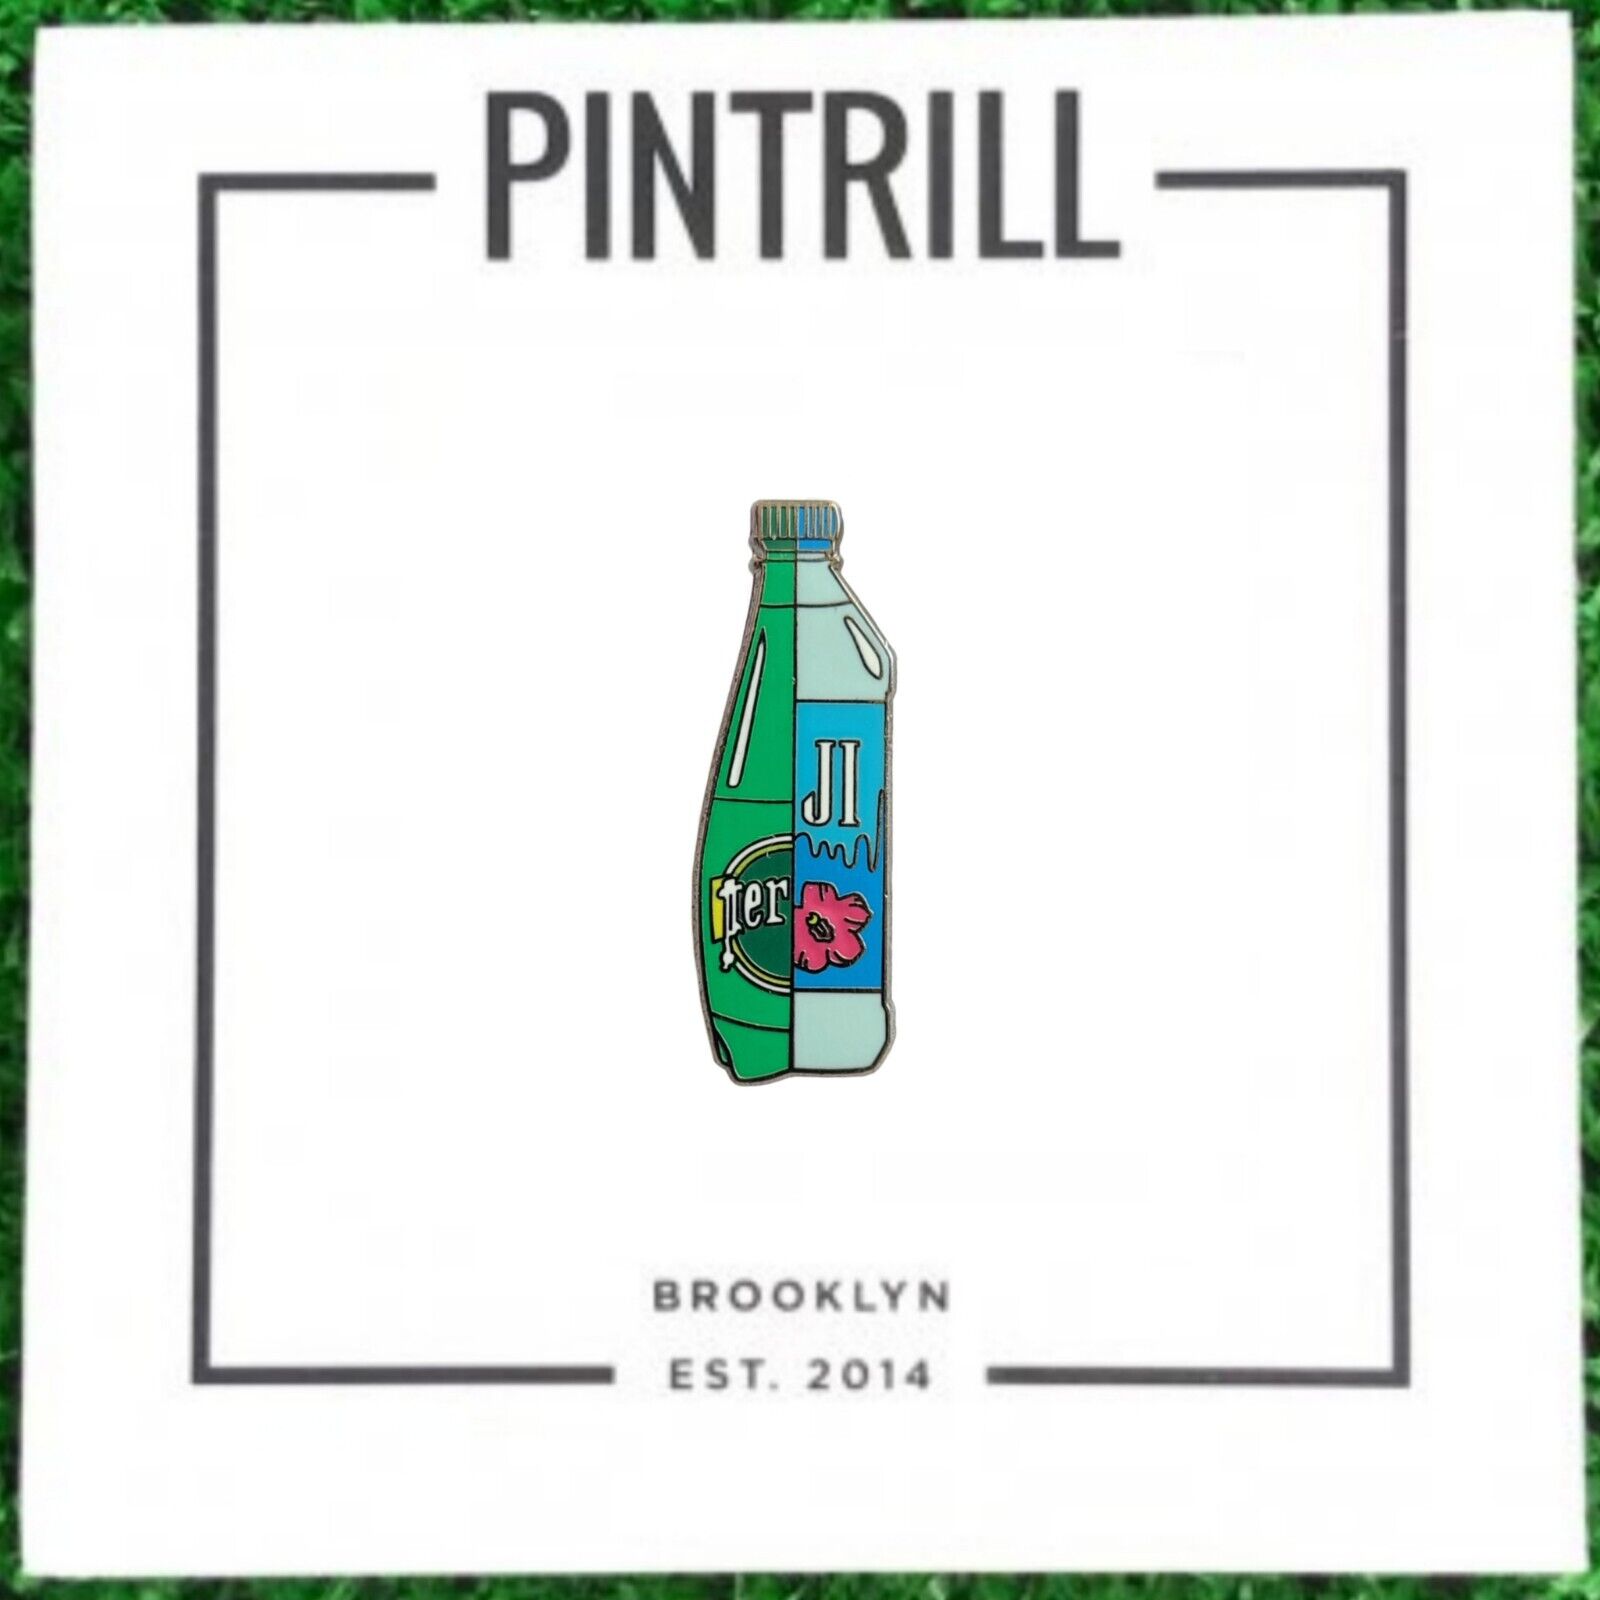 ⚡RARE⚡PINTRILL x PERRIER x FIJI WATER BOTTLE PIN *BRAND NEW SEALED* 💧